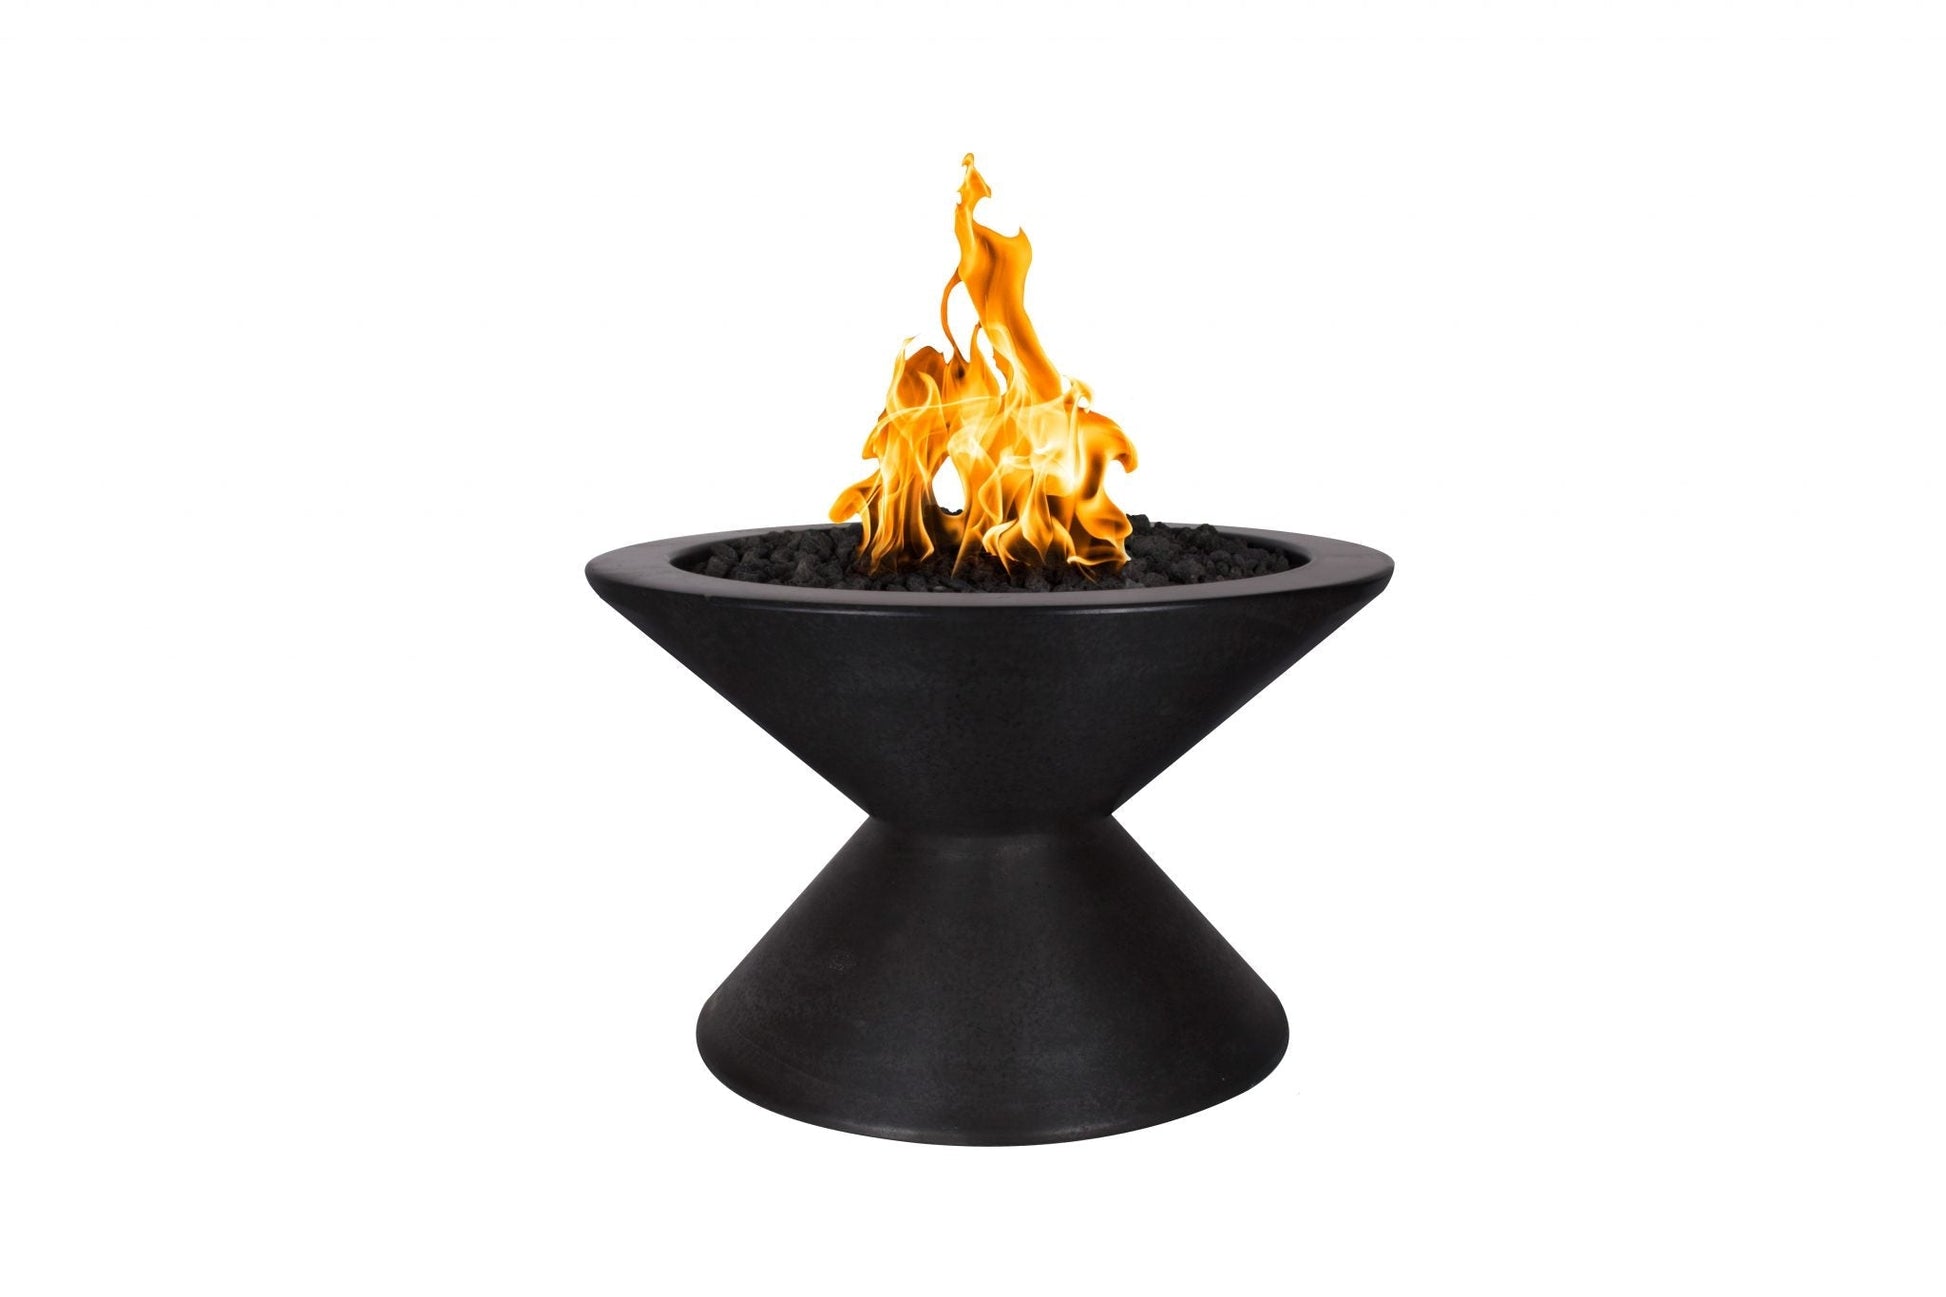 The Outdoor Plus Round Lucia 31" Chocolate GFRC Concrete Liquid Propane Fire Pit with 12V Electronic Ignition